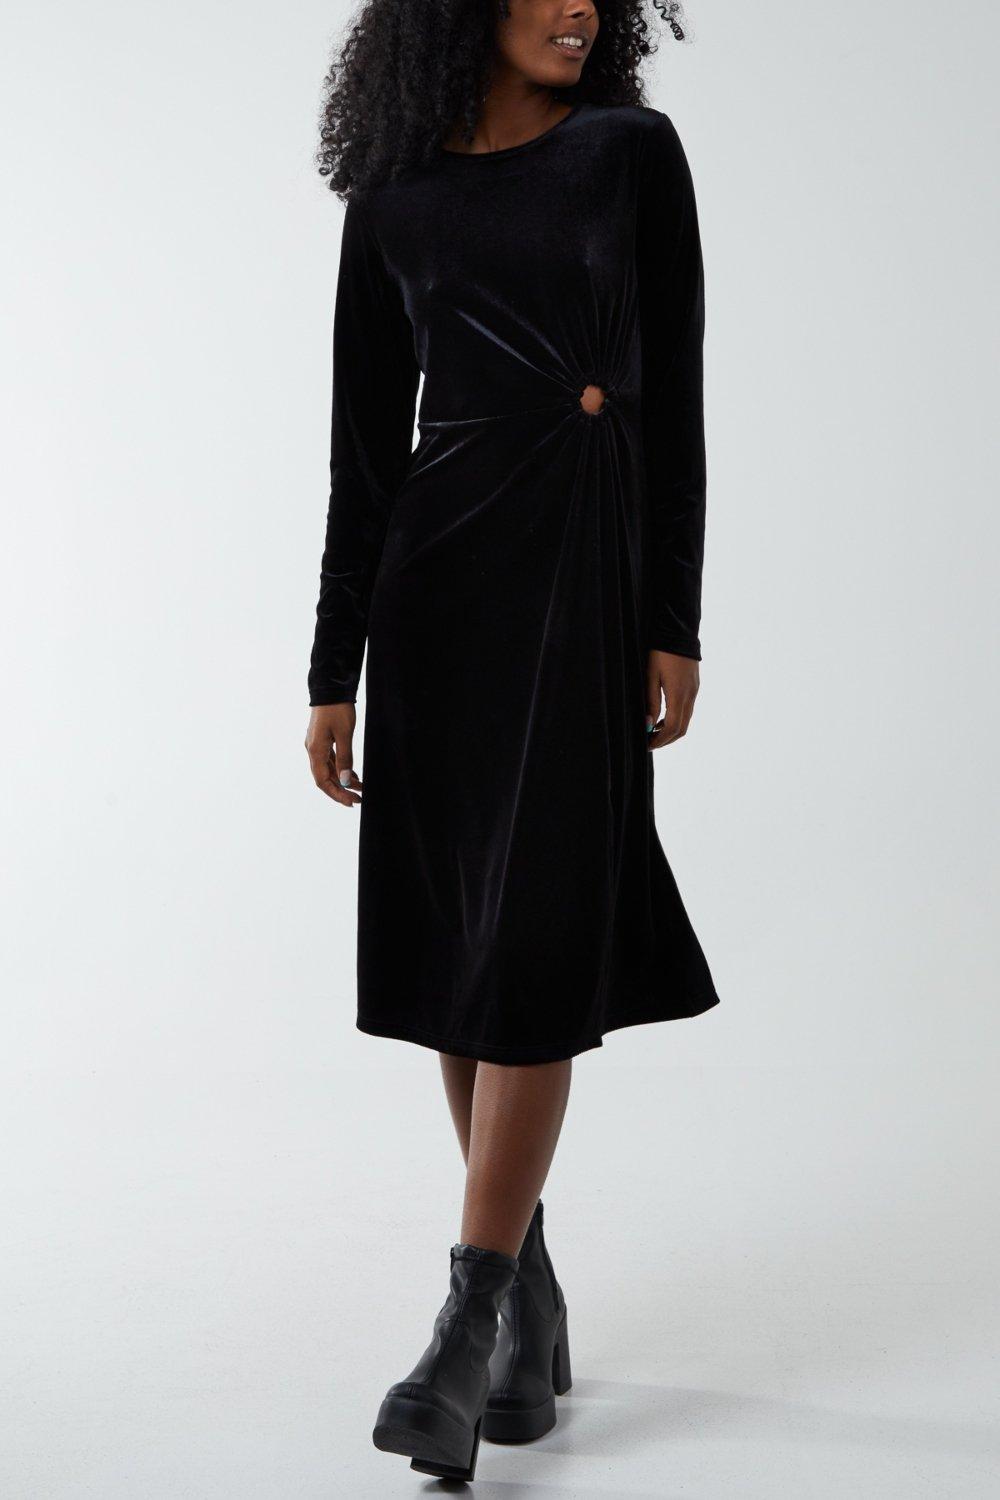 High Neck With Keyhole Detail & Long Sleeve Dress